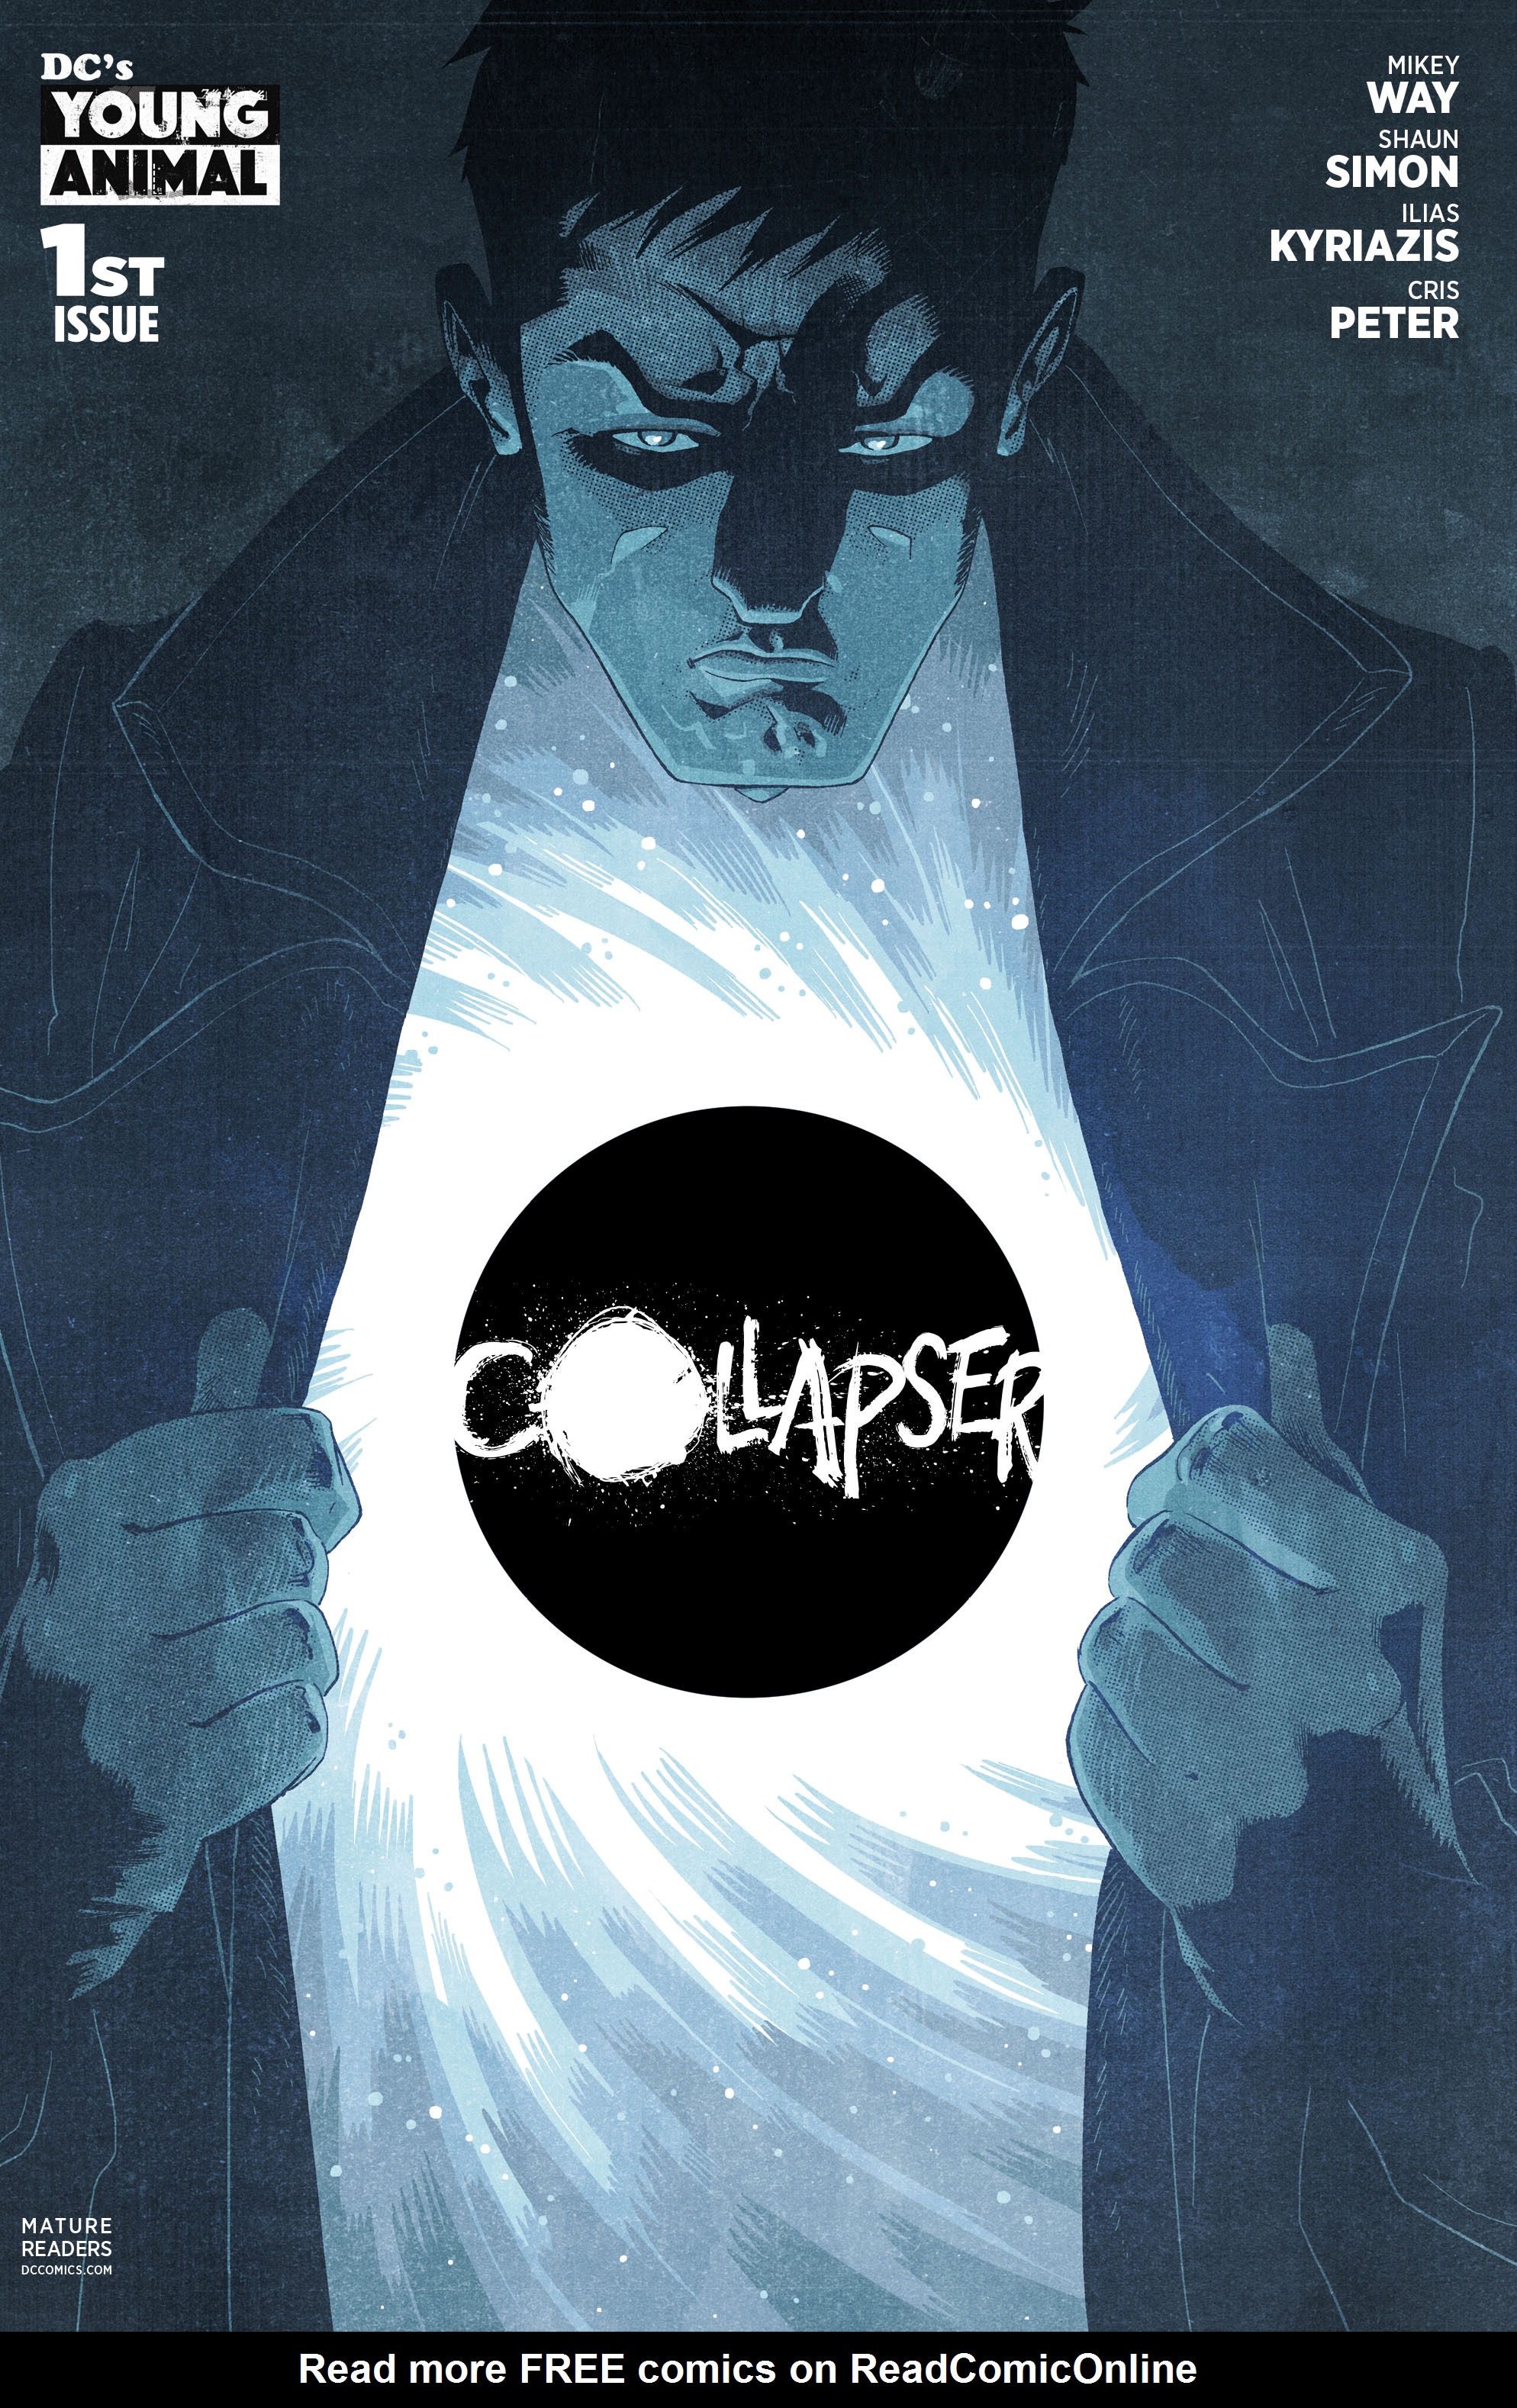 Read online Collapser comic -  Issue #1 - 1